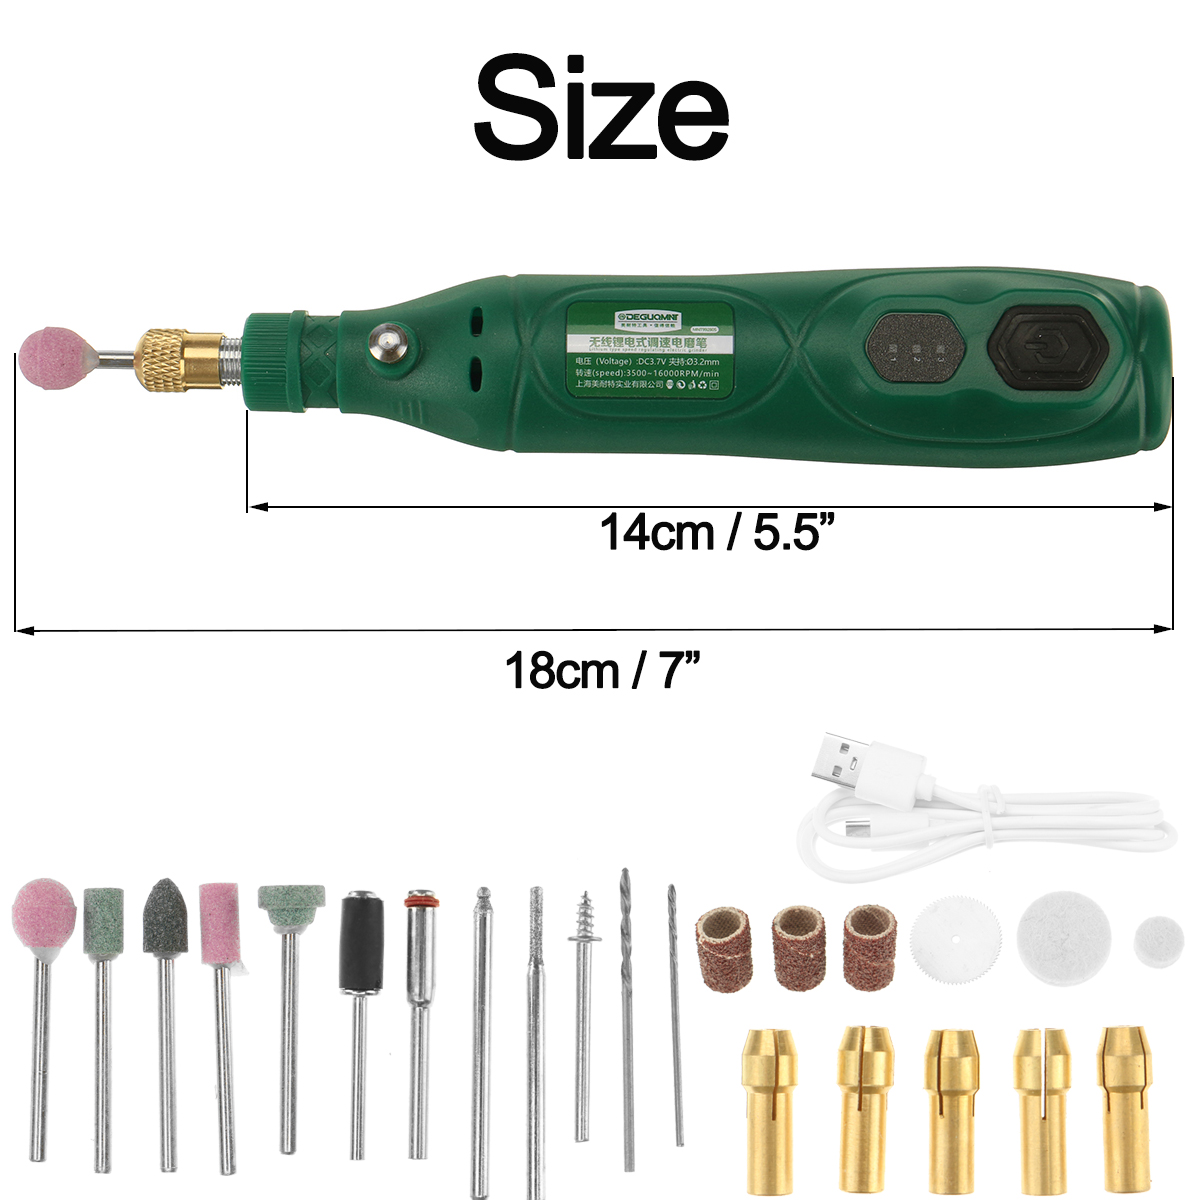 3-Speeds-USB-Rechargeable-Electric-Rotary-Tool-Drill-Grinder-Set-Metal-Wood-Jewelry-Polishing-Engrav-1810530-10